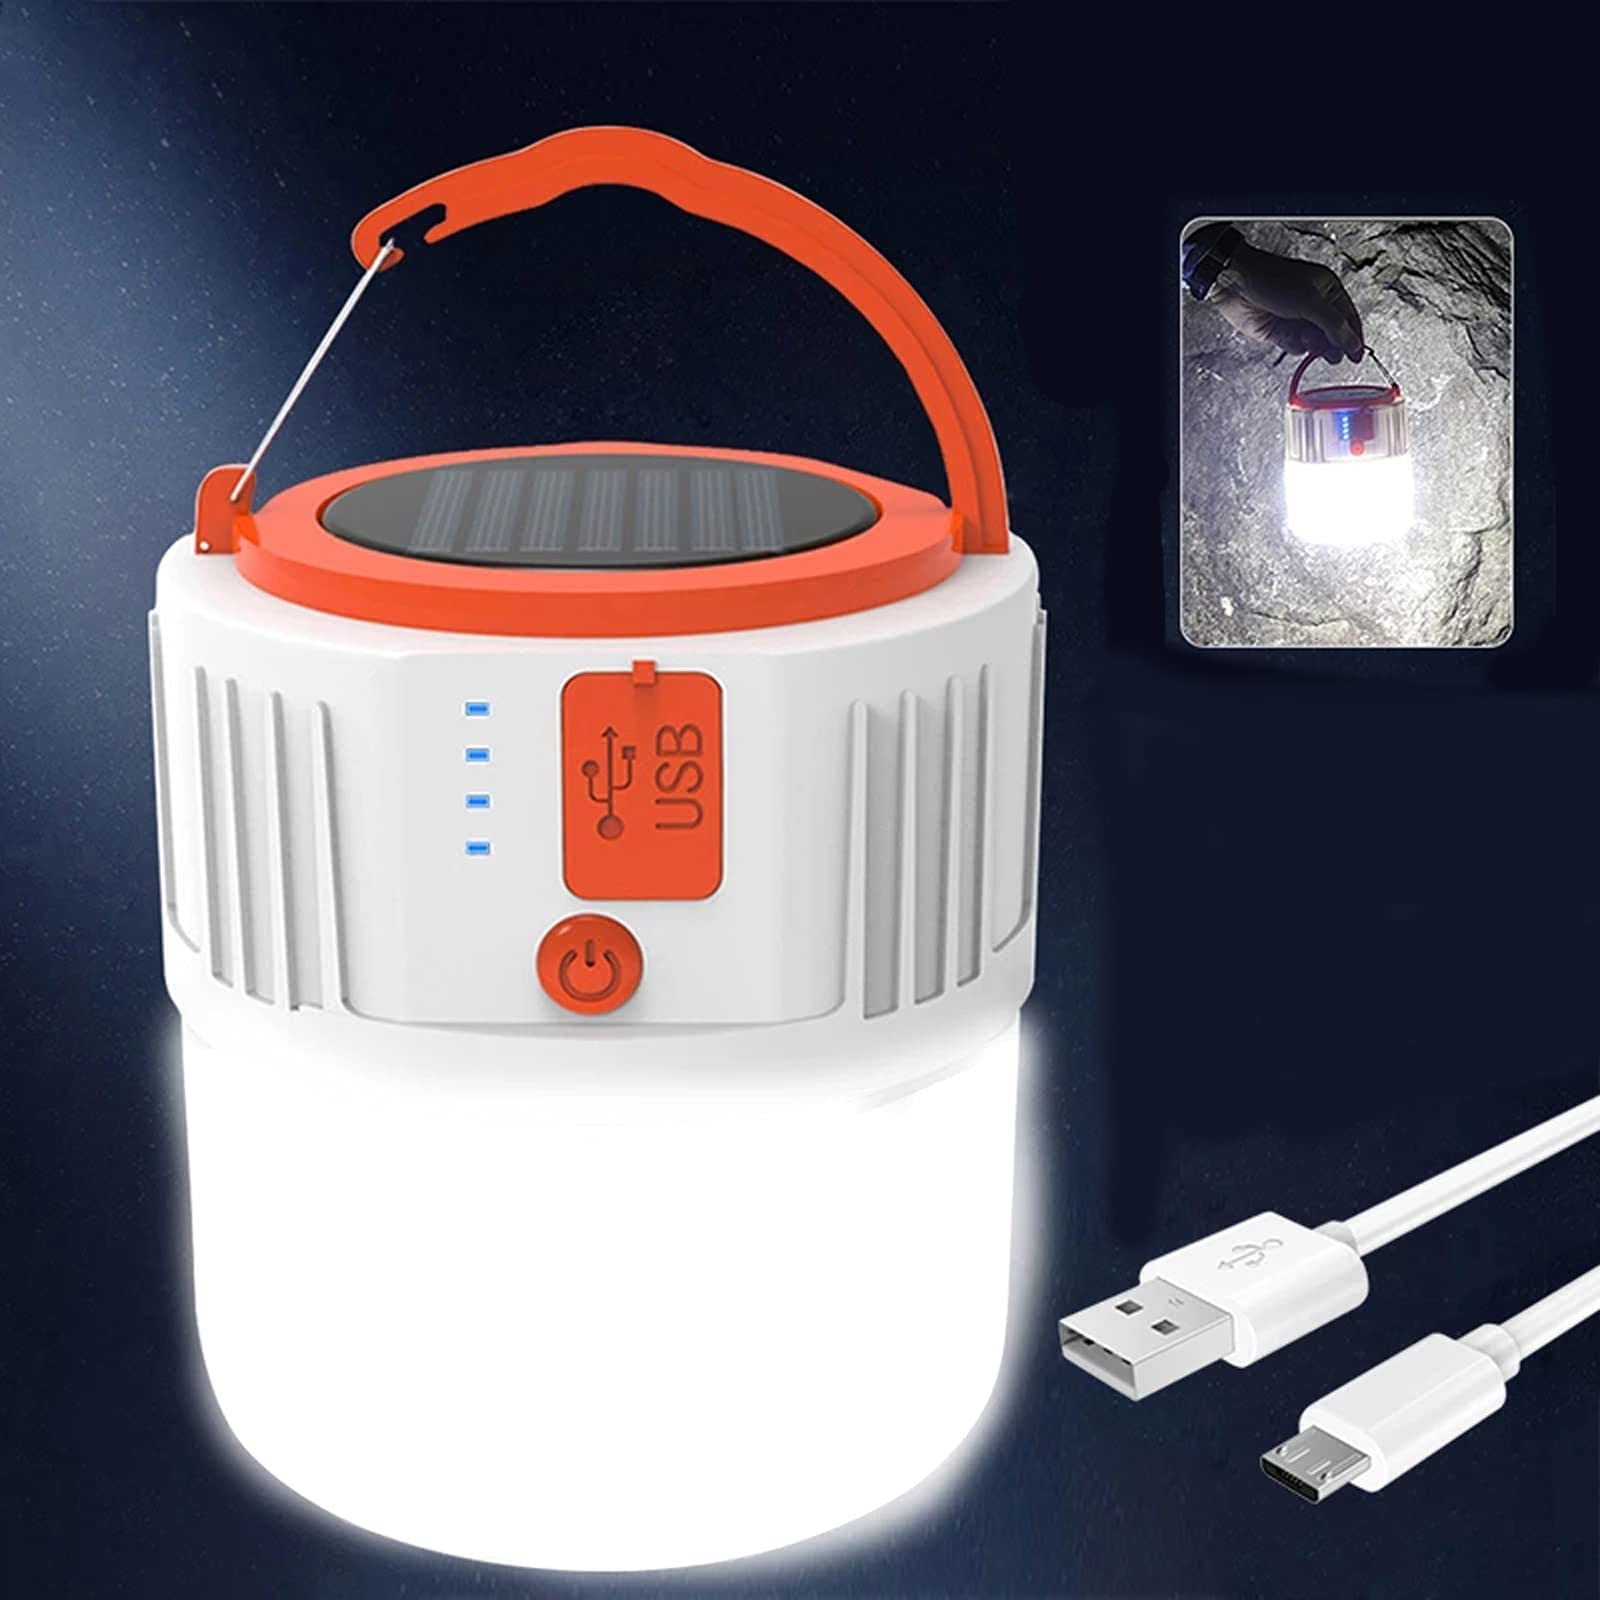 LED Camping Lantern,VGE Solar & USB chargeable 2 in 1 Camping Light,Four Level Power Display, 5 Lighting Modes, IP65 Waterproof, USB Emergency Equipment Charging for Hurricane Emergency -Weiß